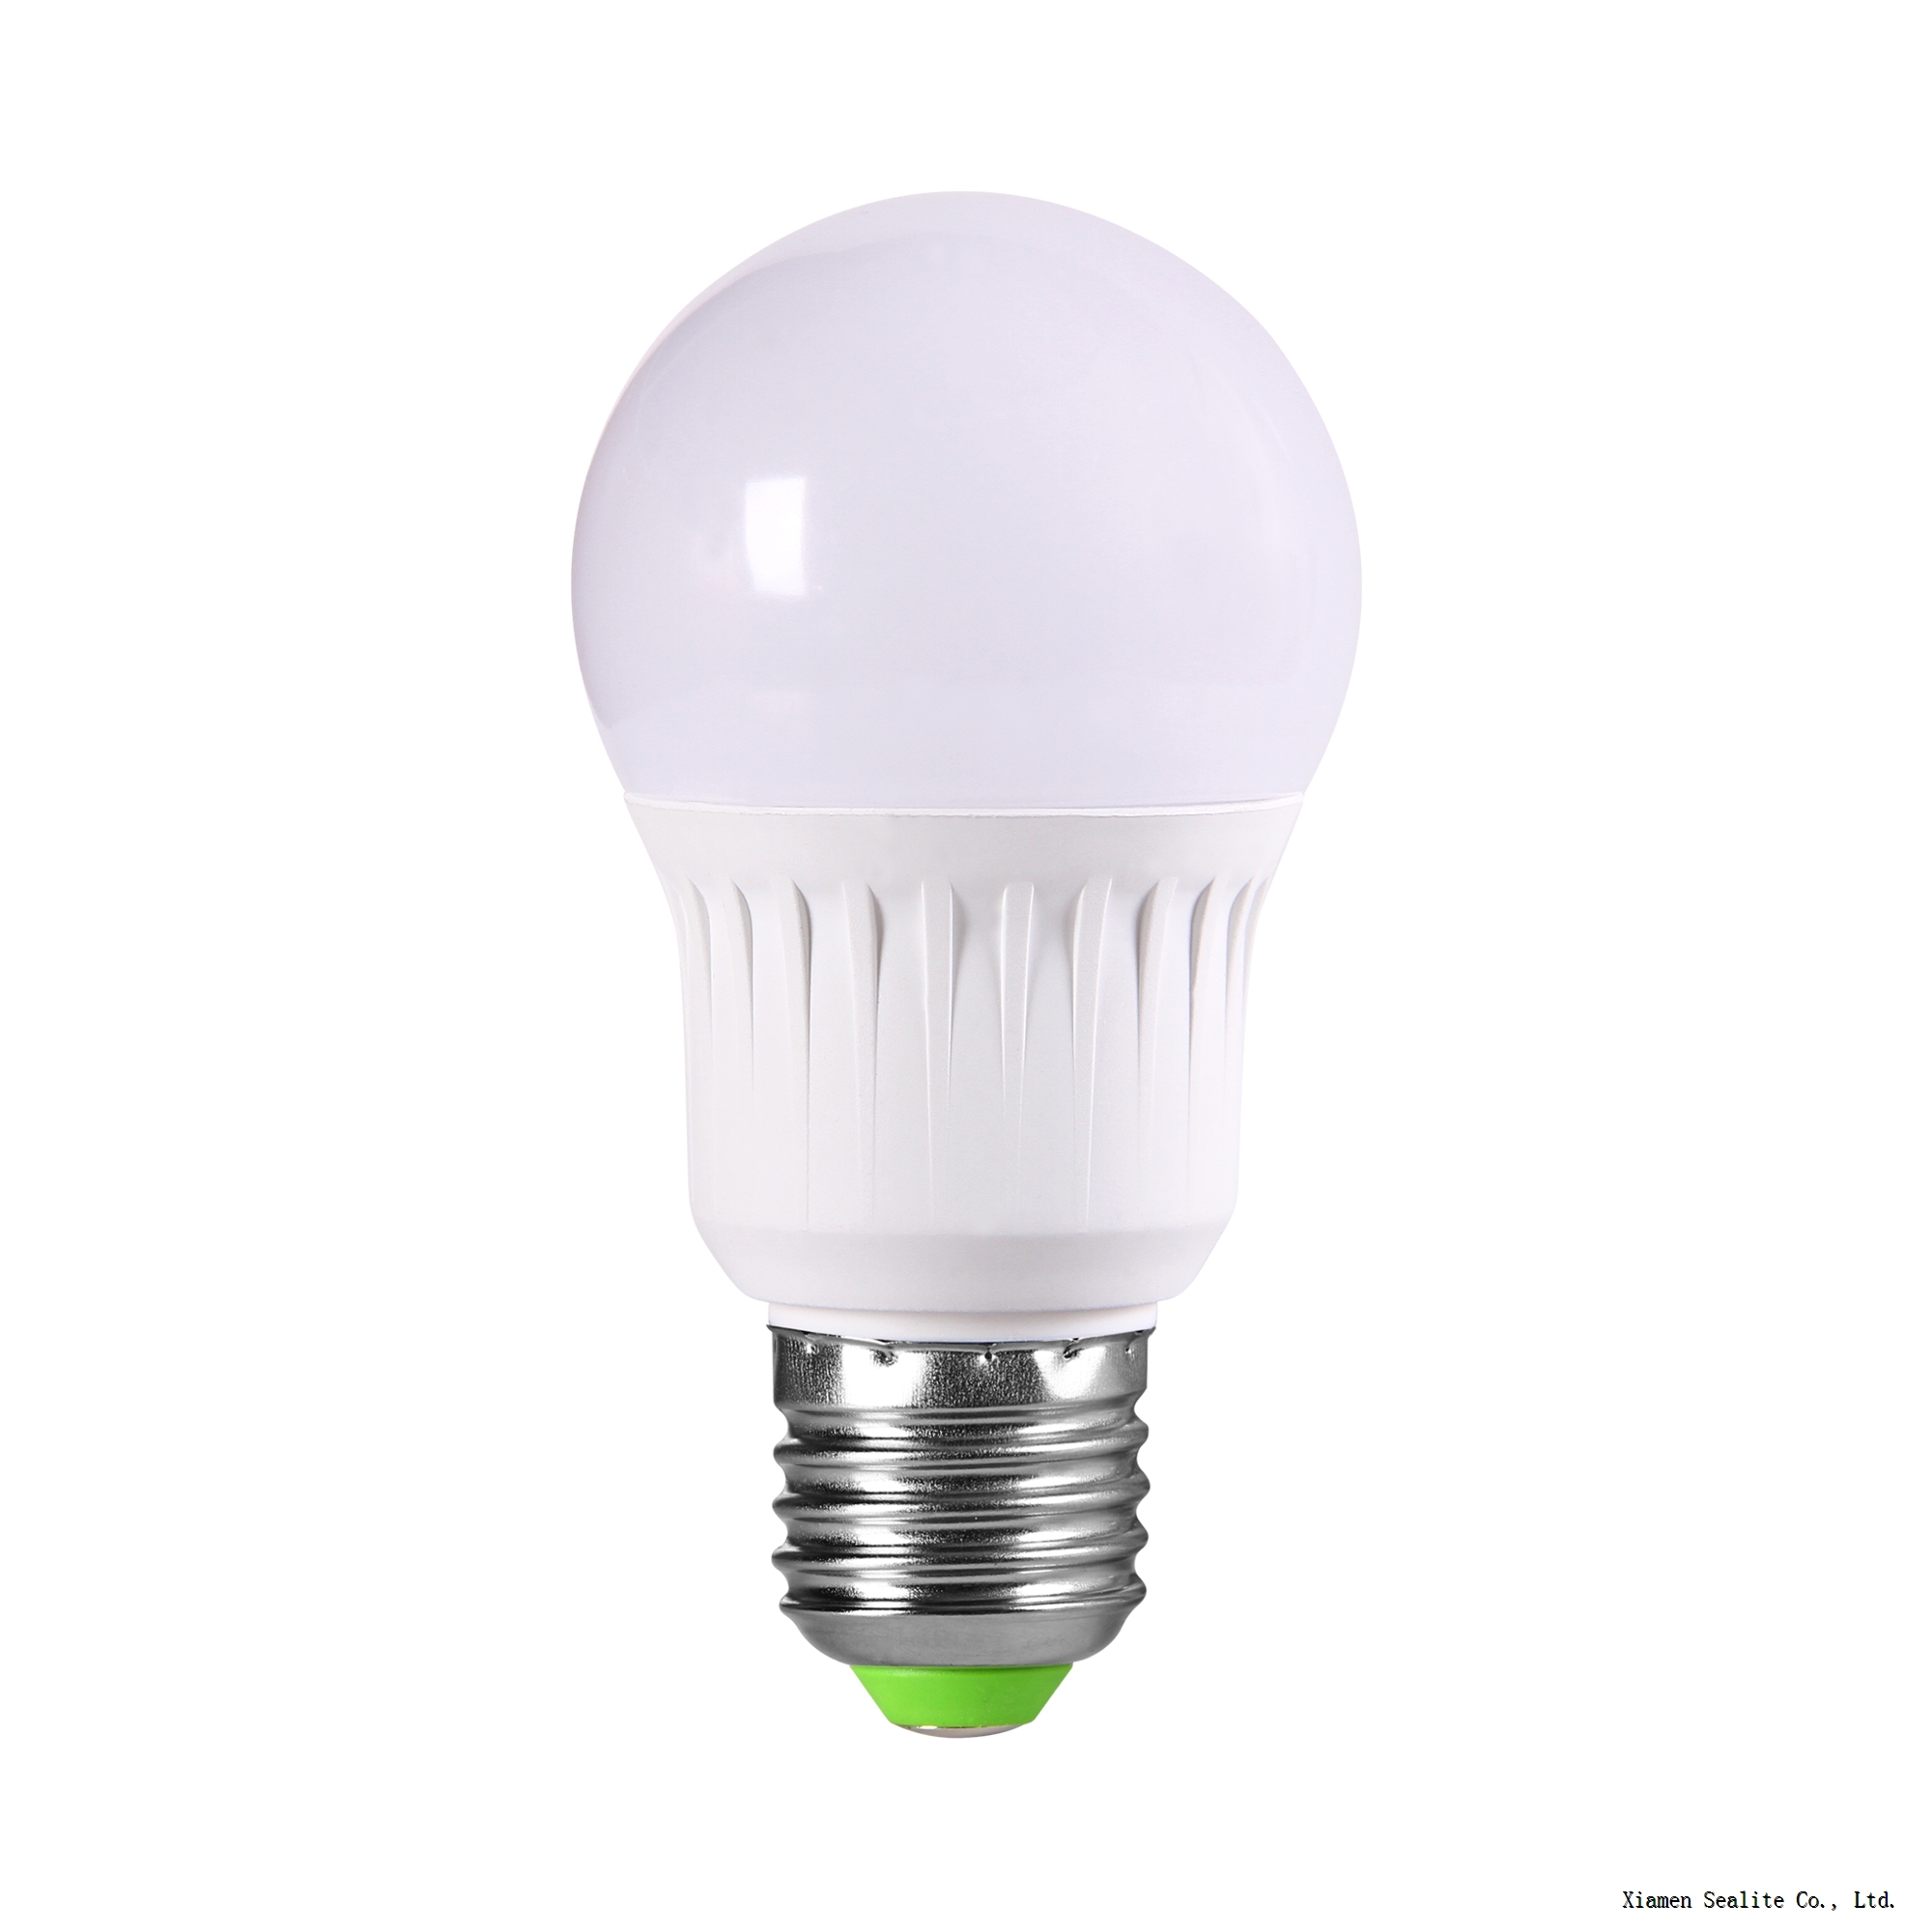 NEW LED Globe Light A70 15W with CE Certification